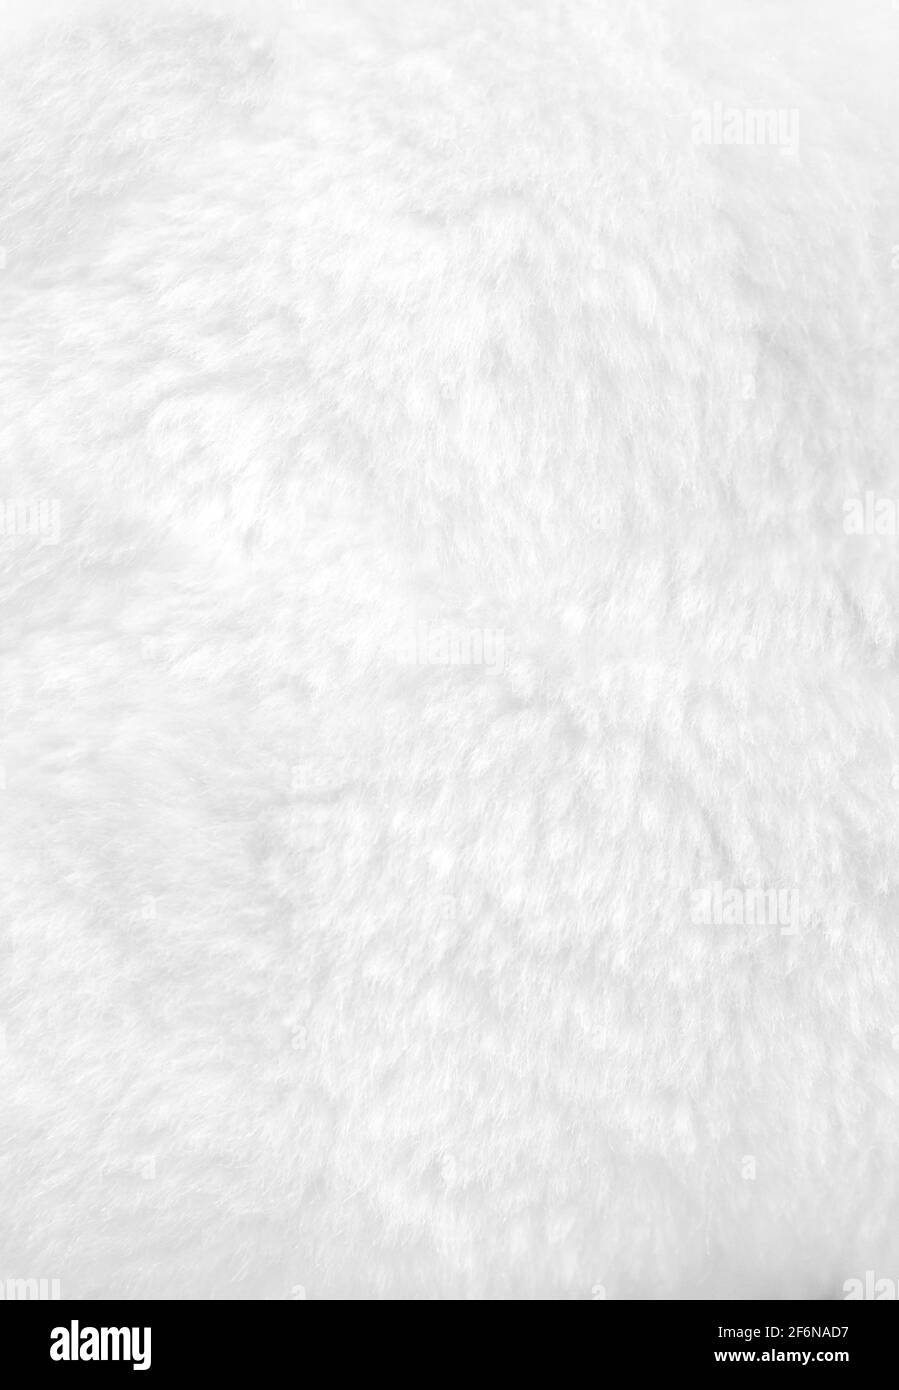 Clean white fur background close up view. Texture wallpaper Stock Photo -  Alamy